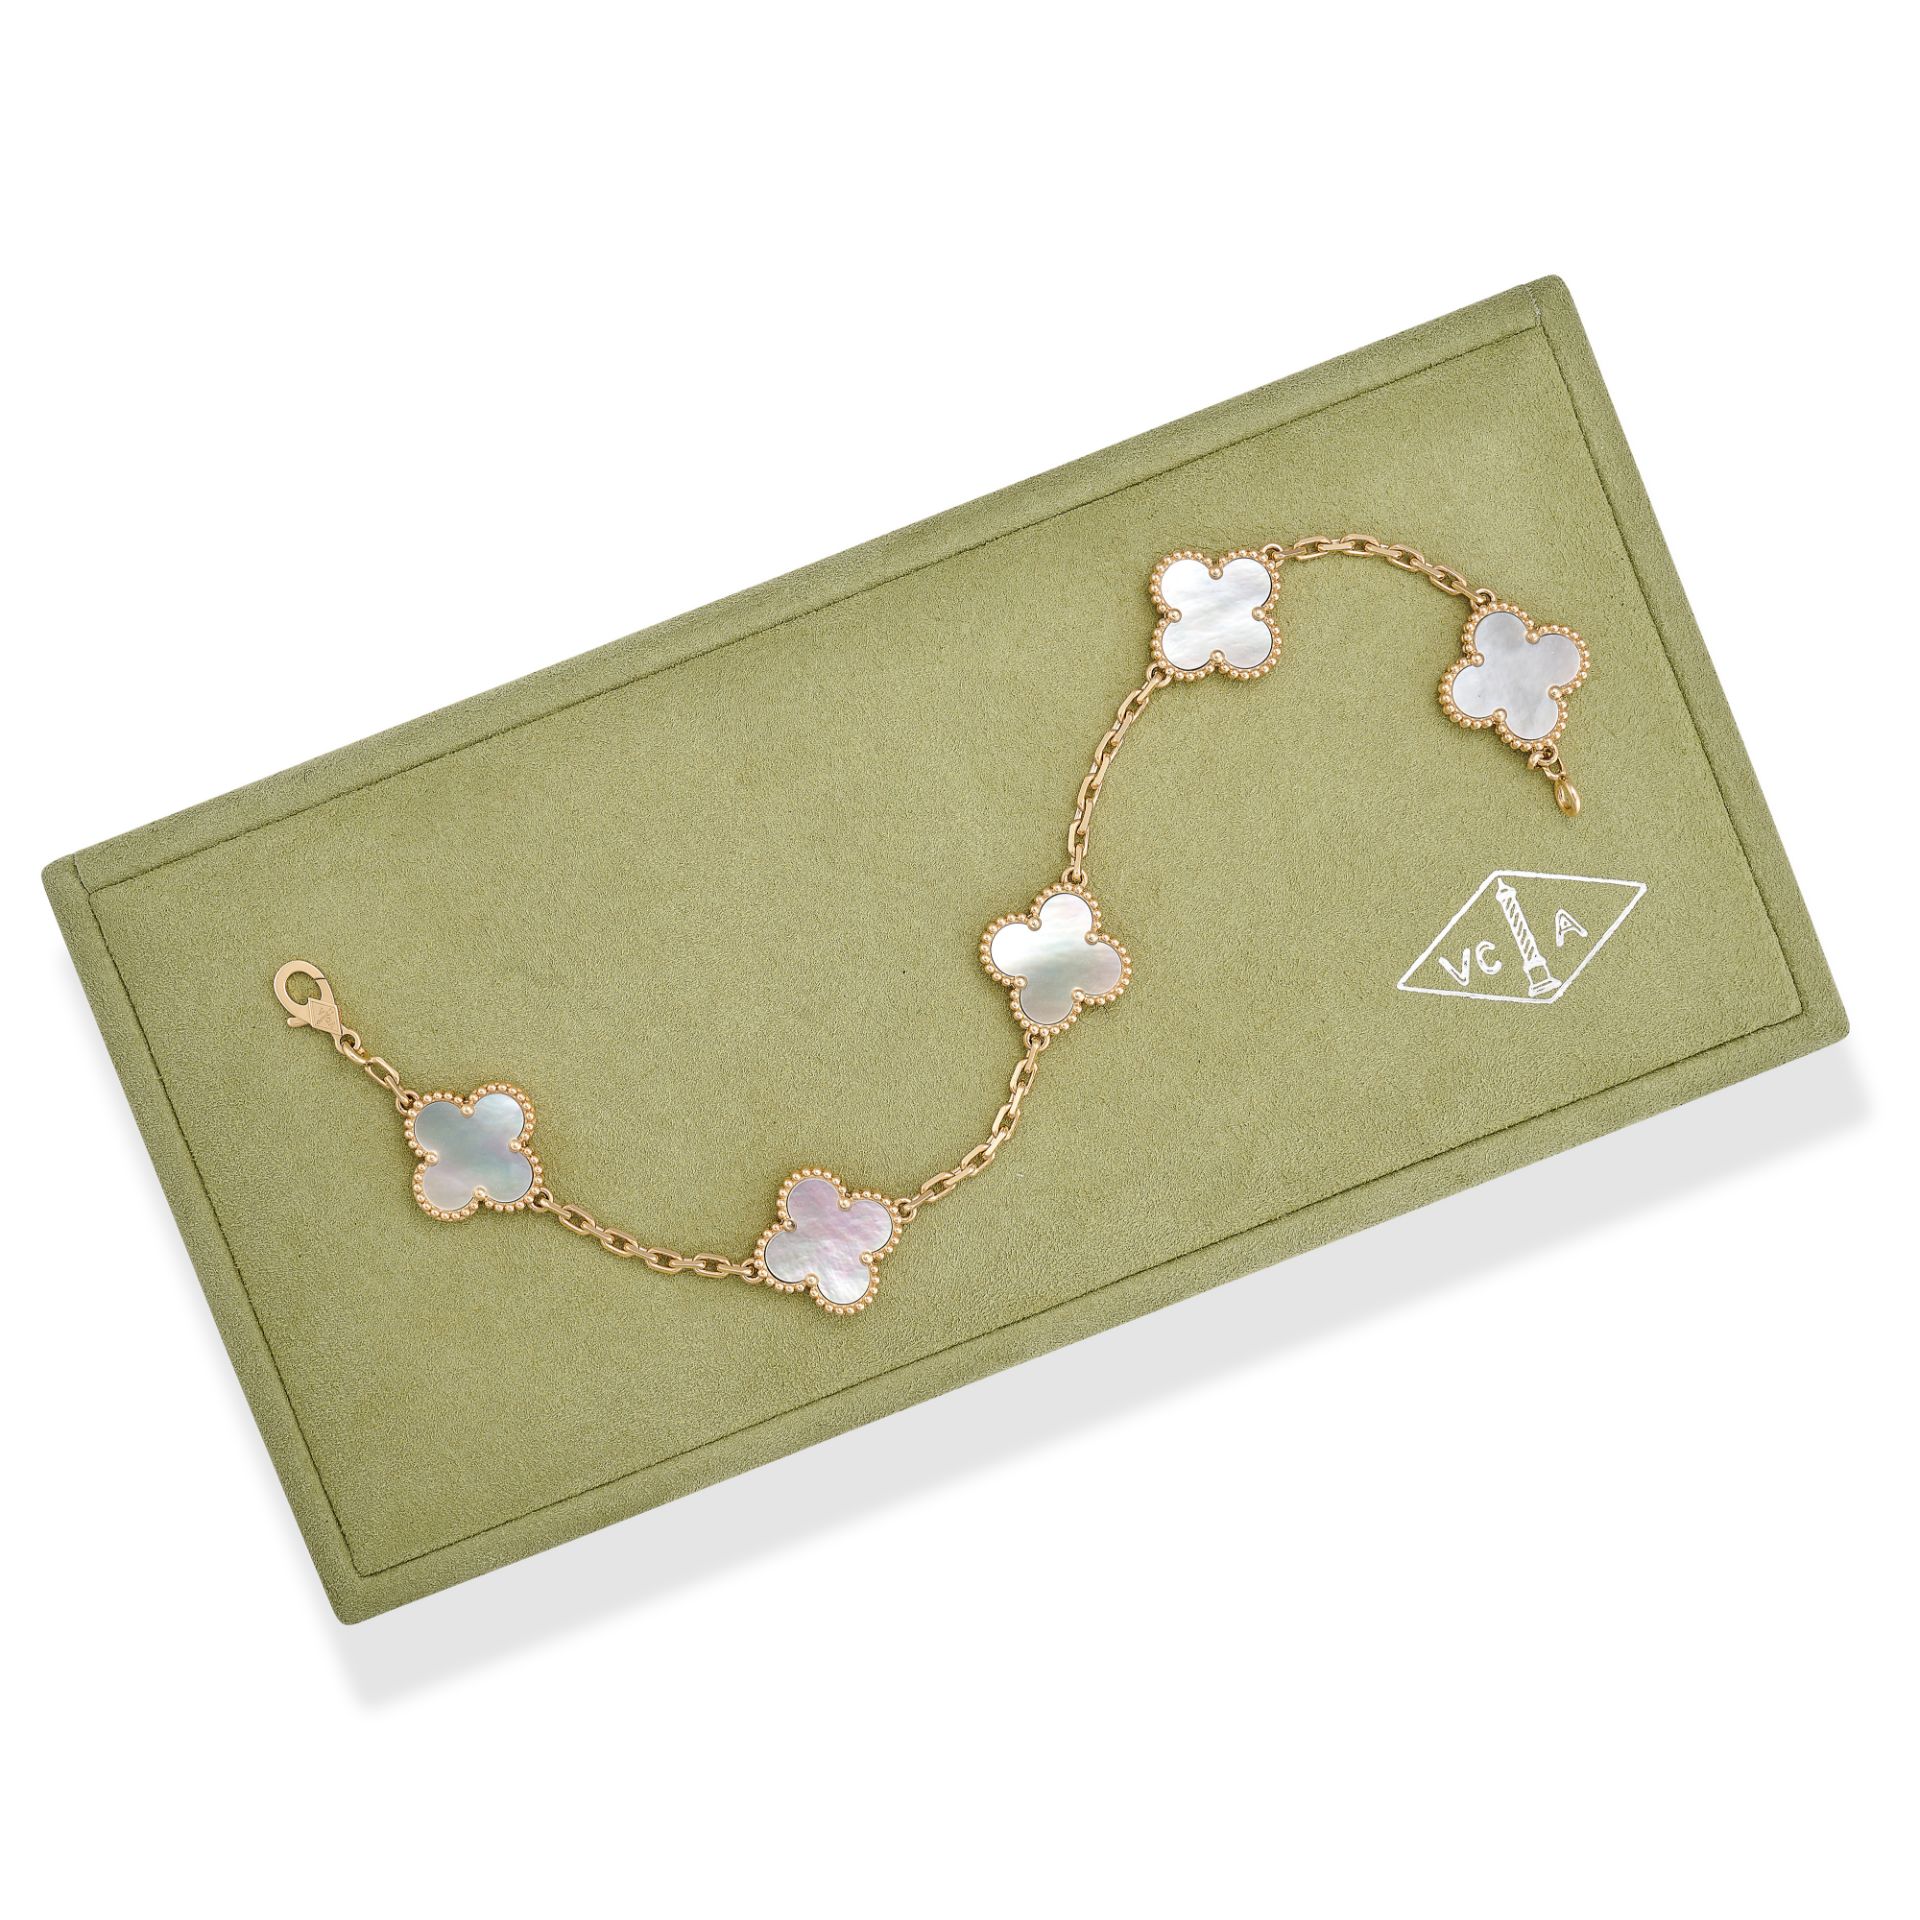 VAN CLEEF & ARPELS, A MOTHER OF PEARL ALHAMBRA BRACELET in 18ct yellow gold, comprising five - Image 2 of 4